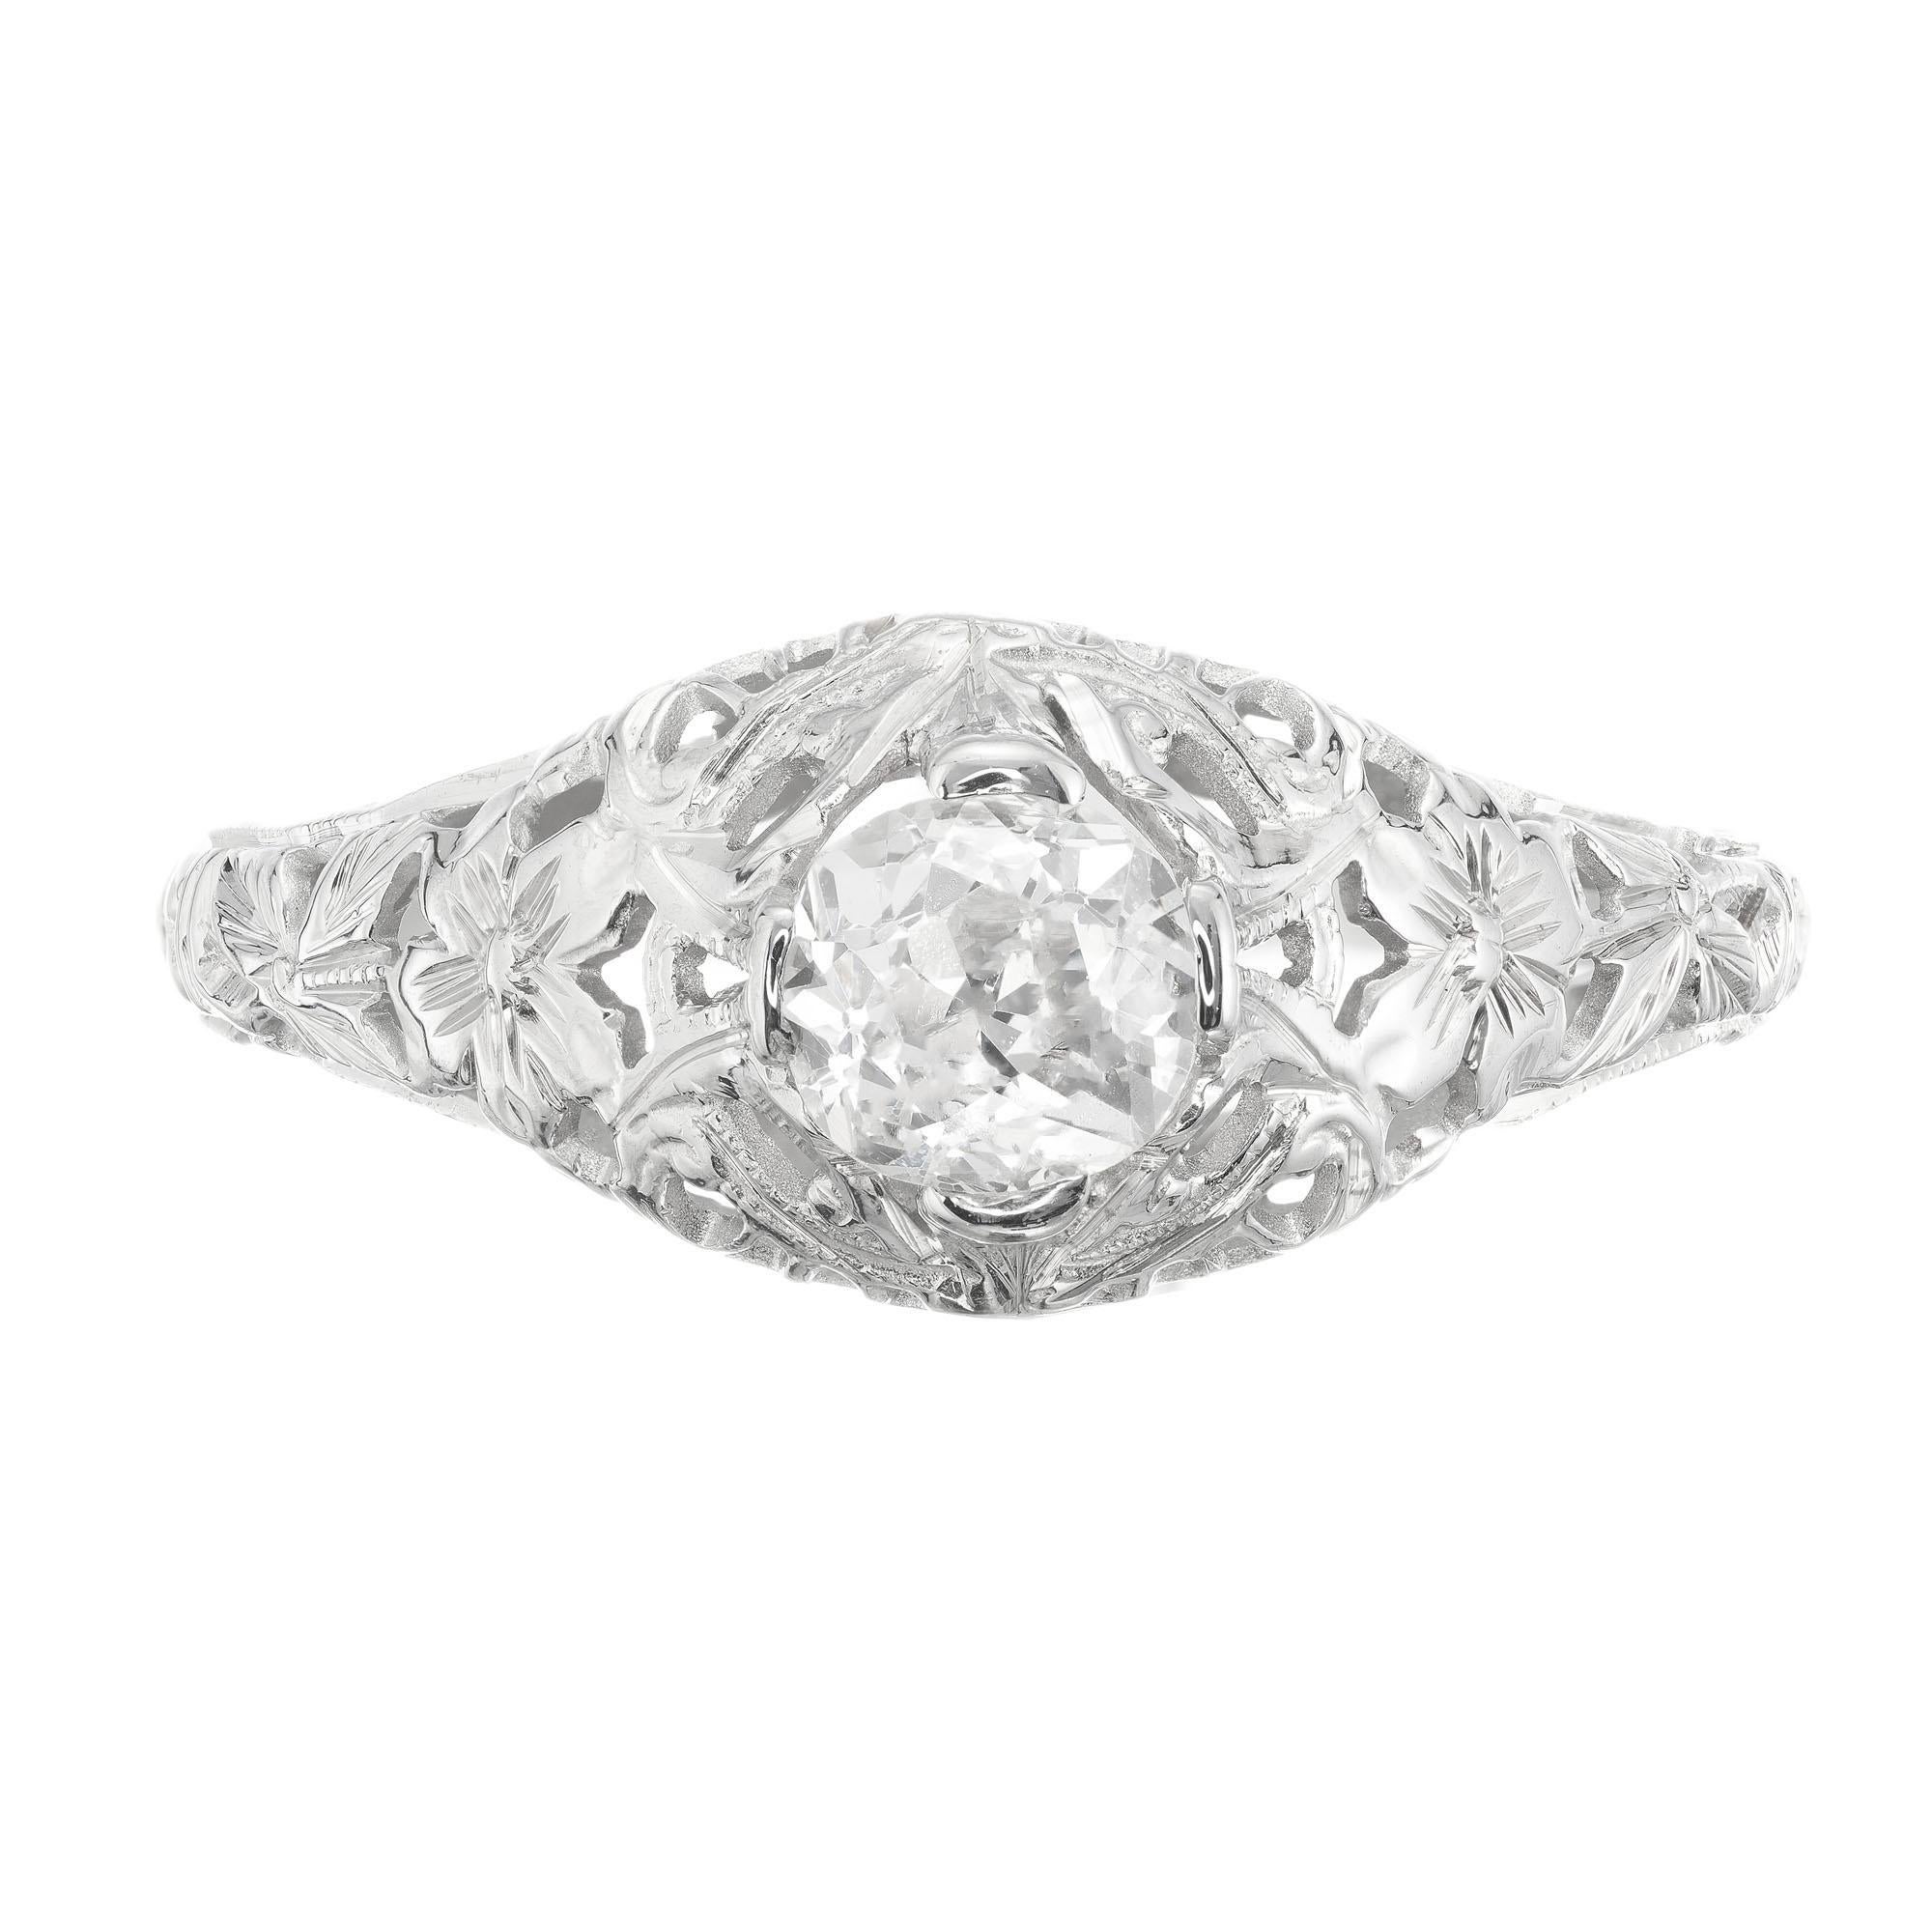 1920's Art Deco diamond engagement ring. EGL certified old mine center diamond, set in an open work 18k white gold engraved setting. 

1 old mine cut diamond, approx. total weight .50cts, H, SI2
Size 7.75 and sizable
18k White Gold
Stamped: 18k
2.6